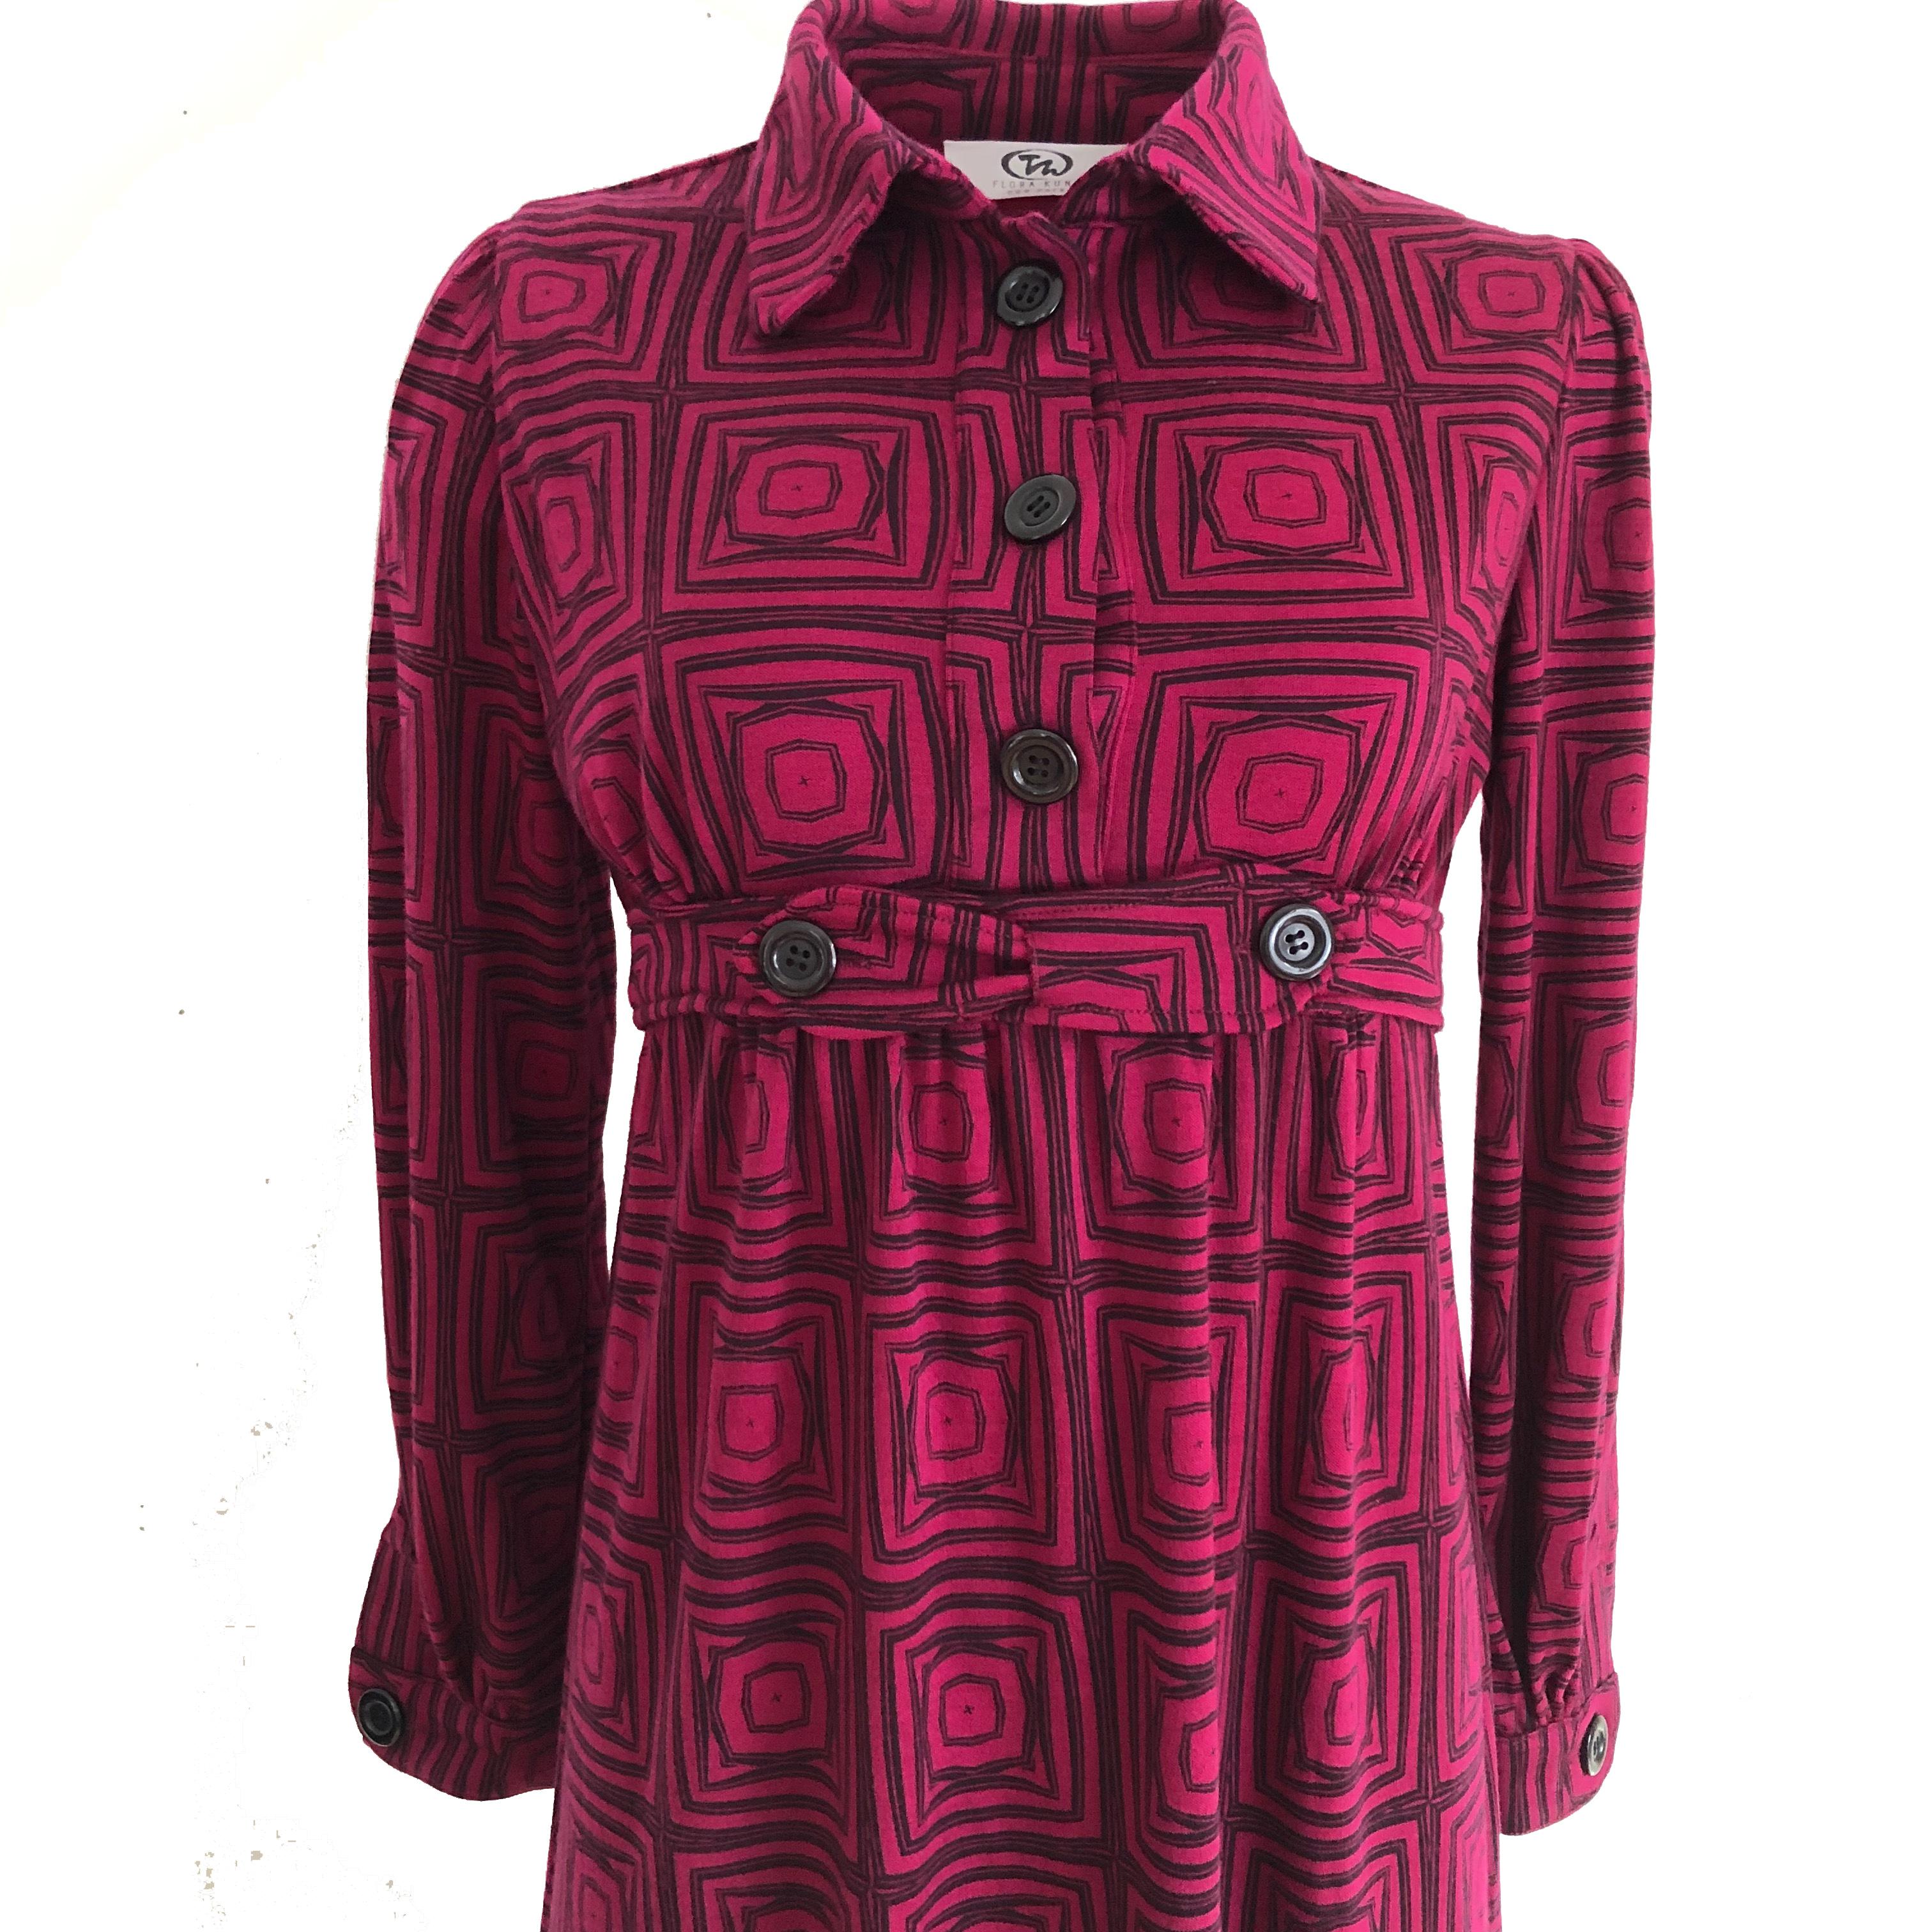 Never-before-available is this chic and warm Flora Kung 100% wool jersey dress with tons of subtle details, including very slight empire waist and inseam POCKETS!

Made in the designer's hand created original print and hand-mixed , this refined,